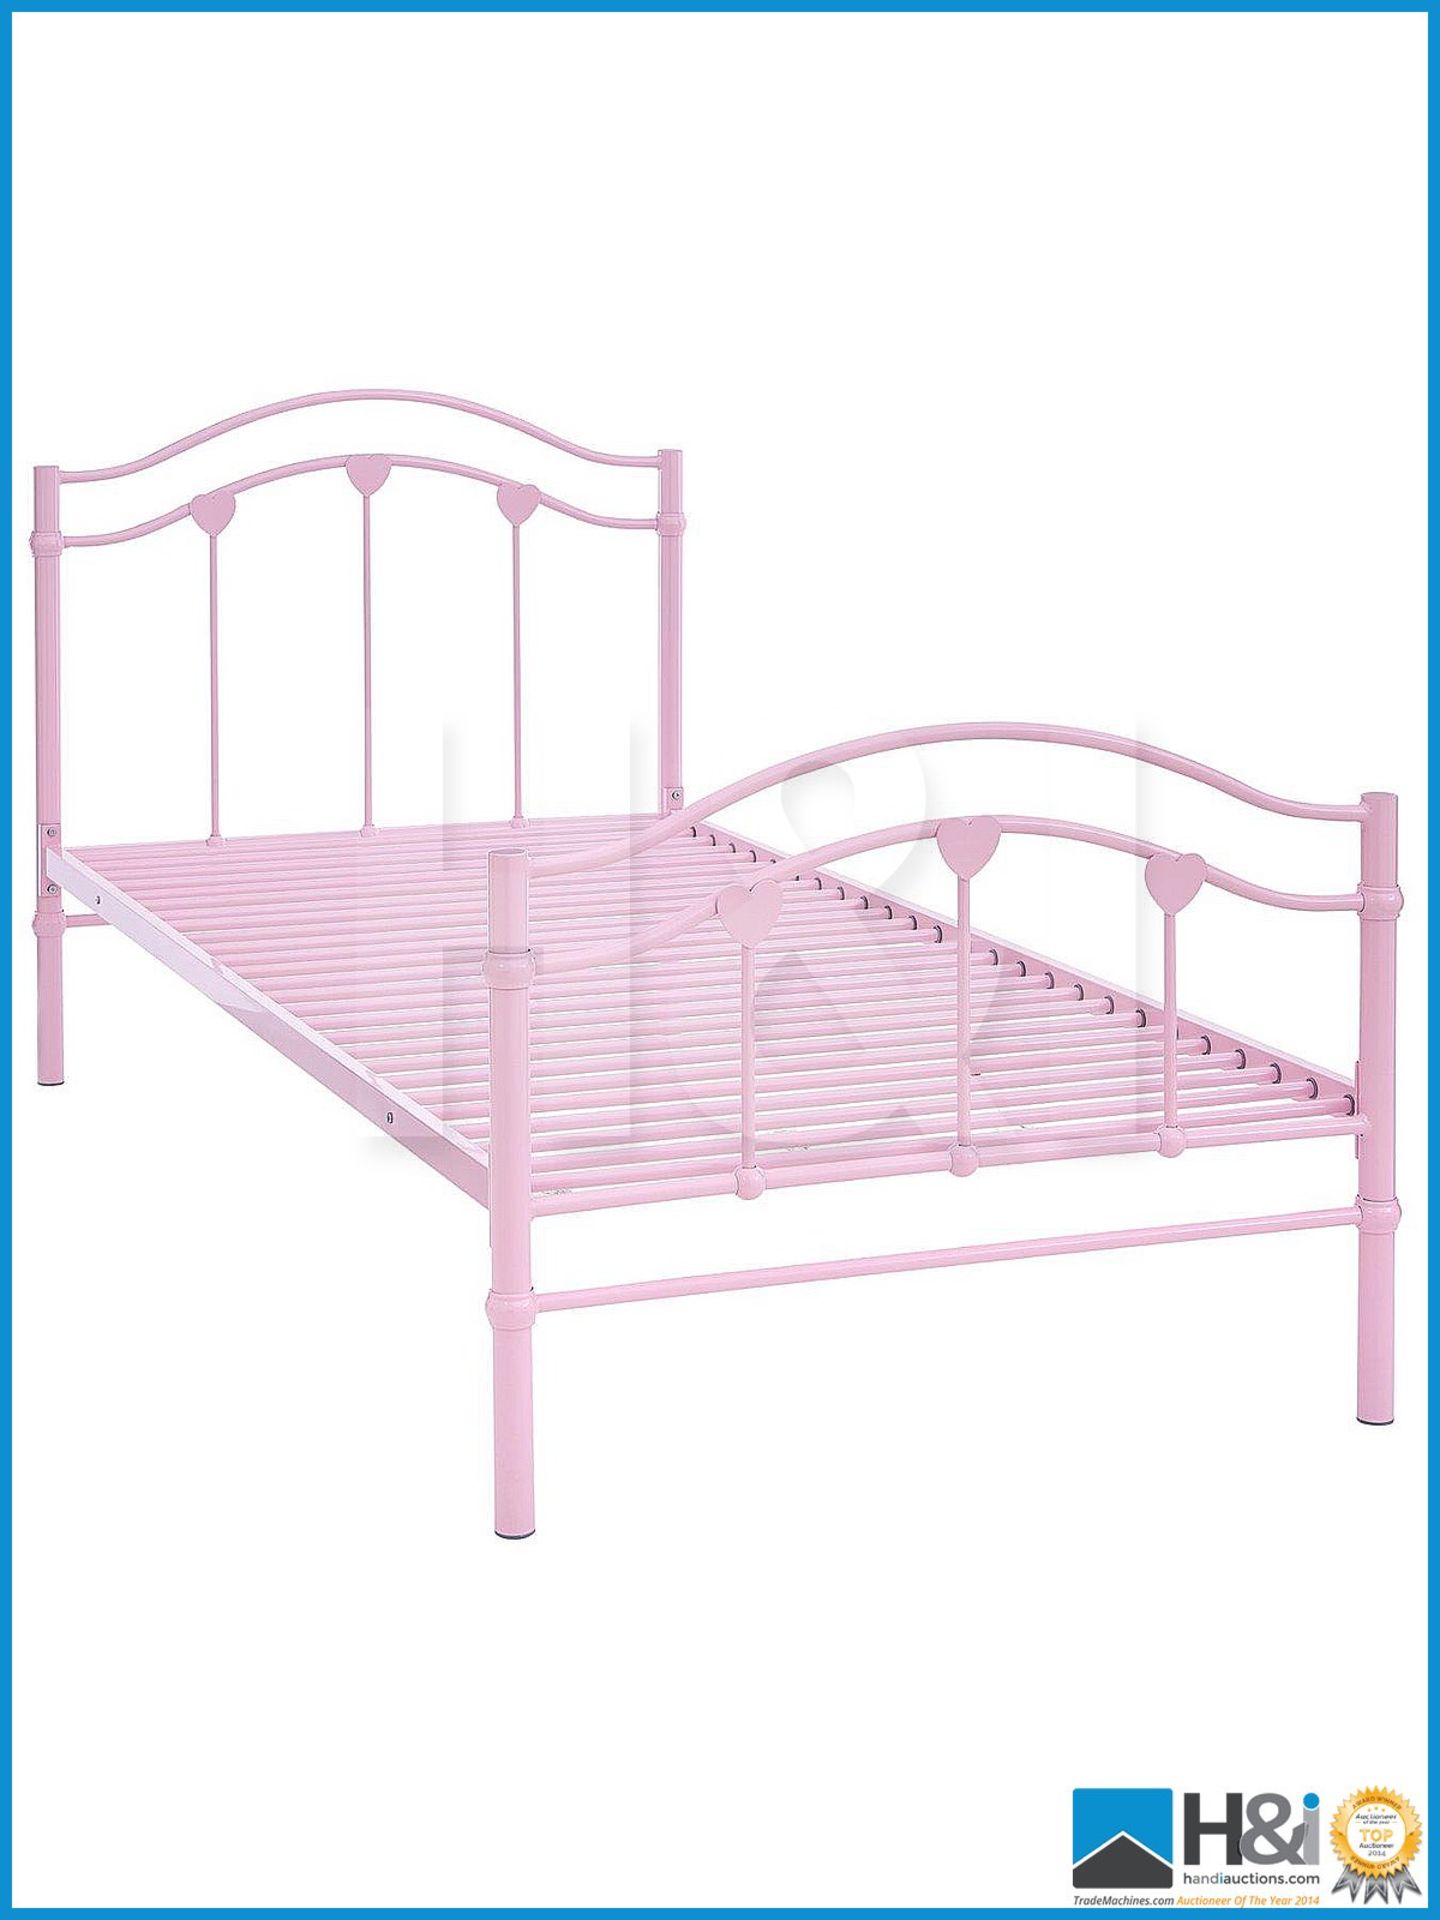 NEW IN BOX HEART SINGLE BED [PINK] RRP GBP 159